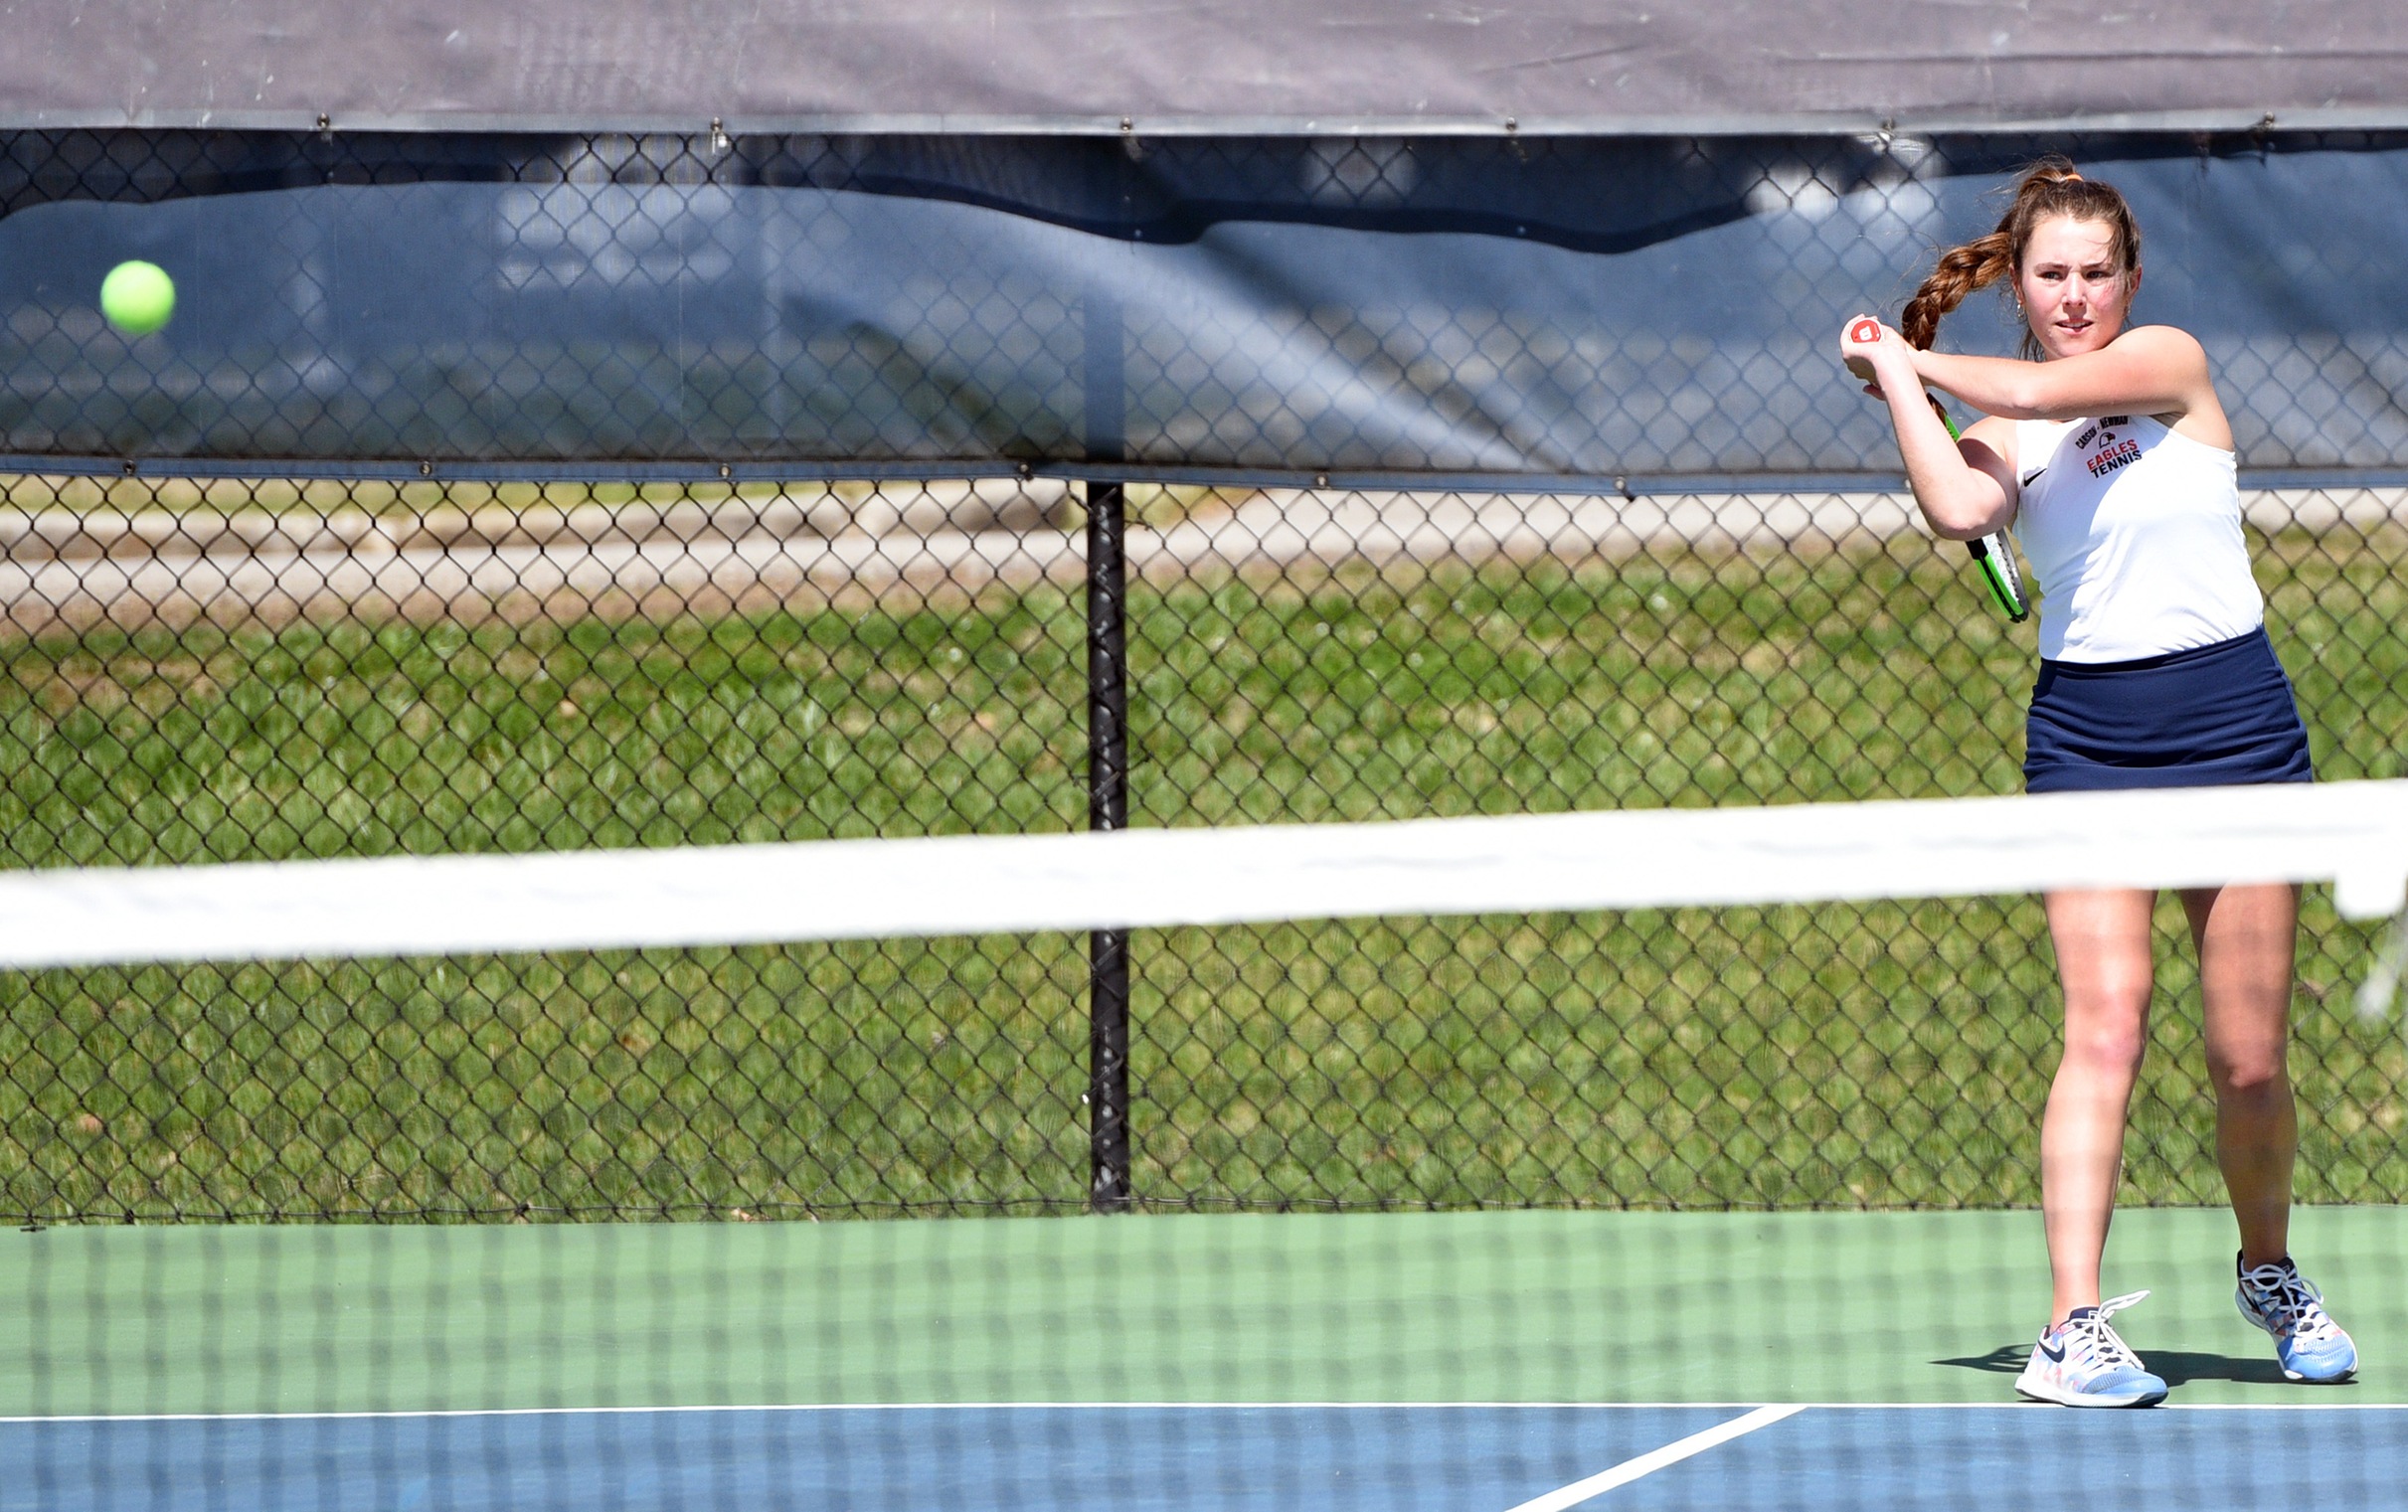 Price notches tenth singles victory to match career high as Eagles sweep Mars Hill